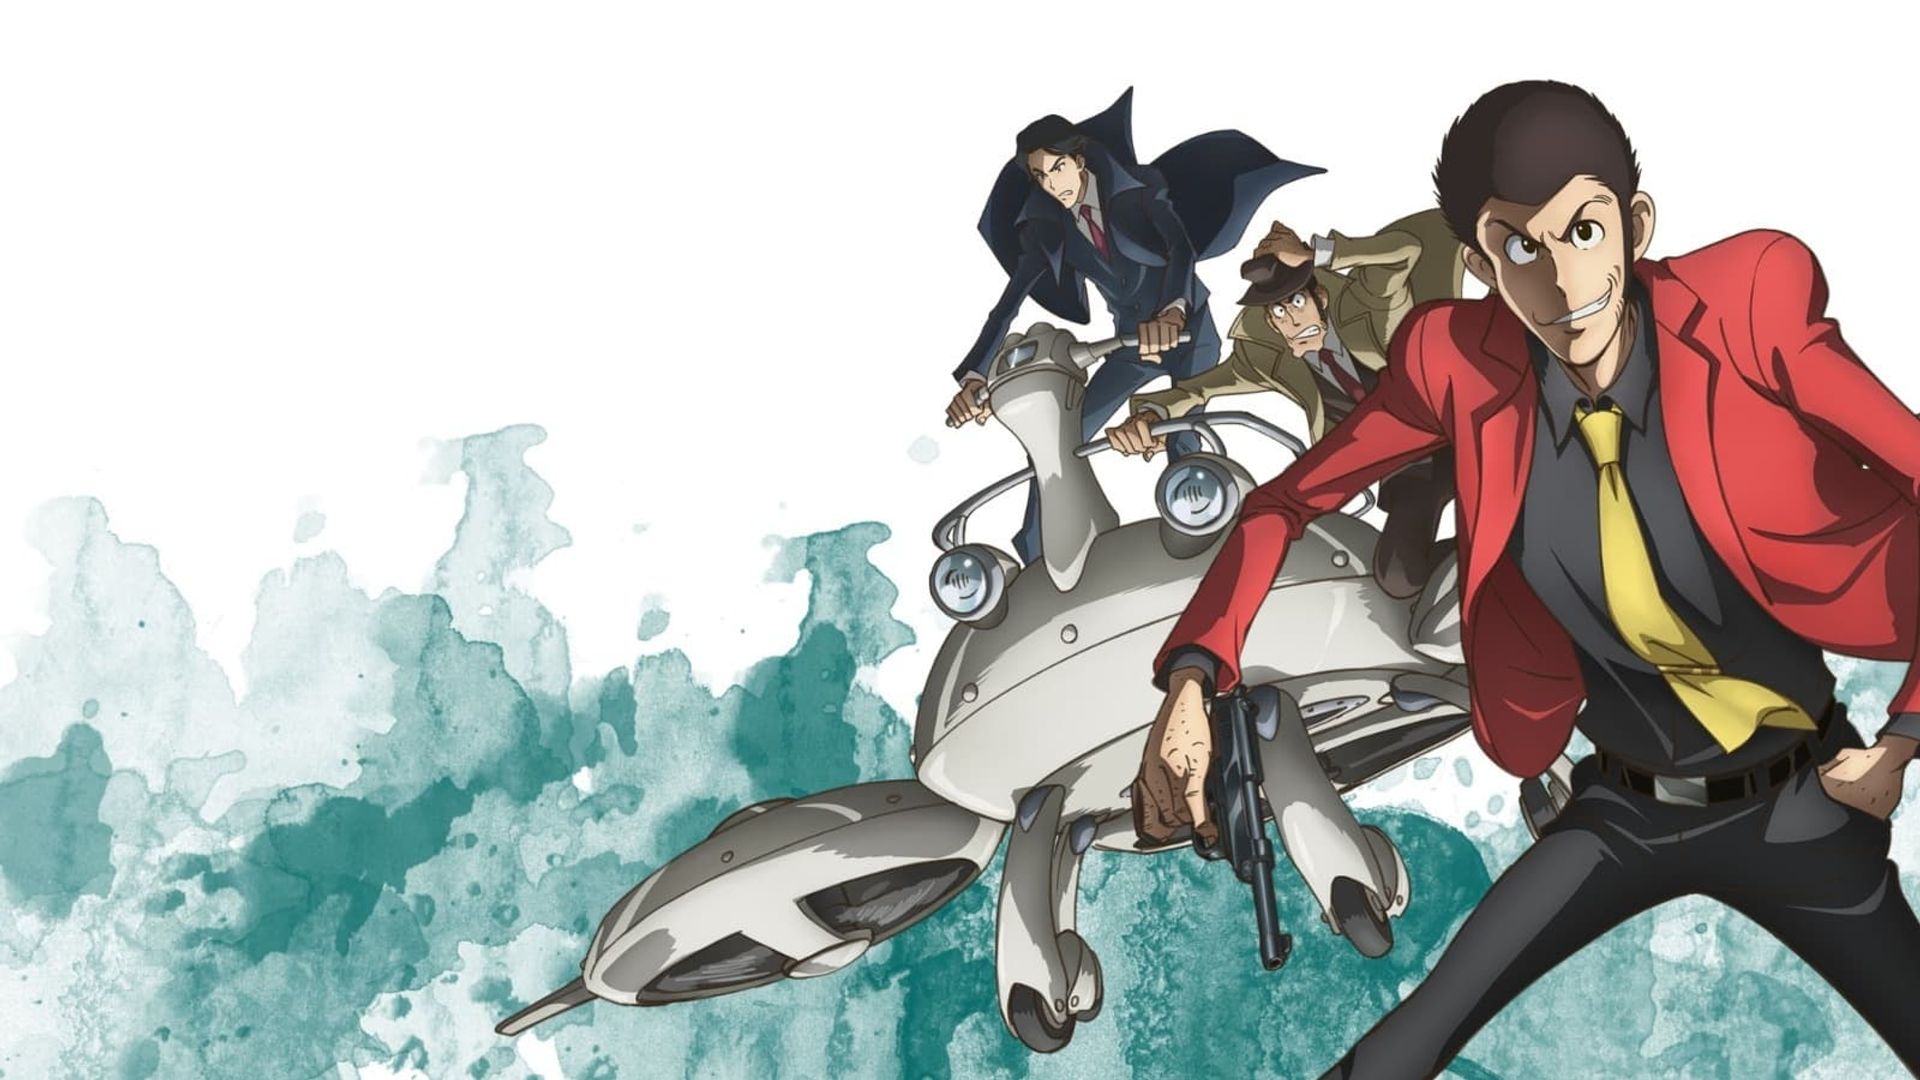 Lupin III: Prison of the Past background